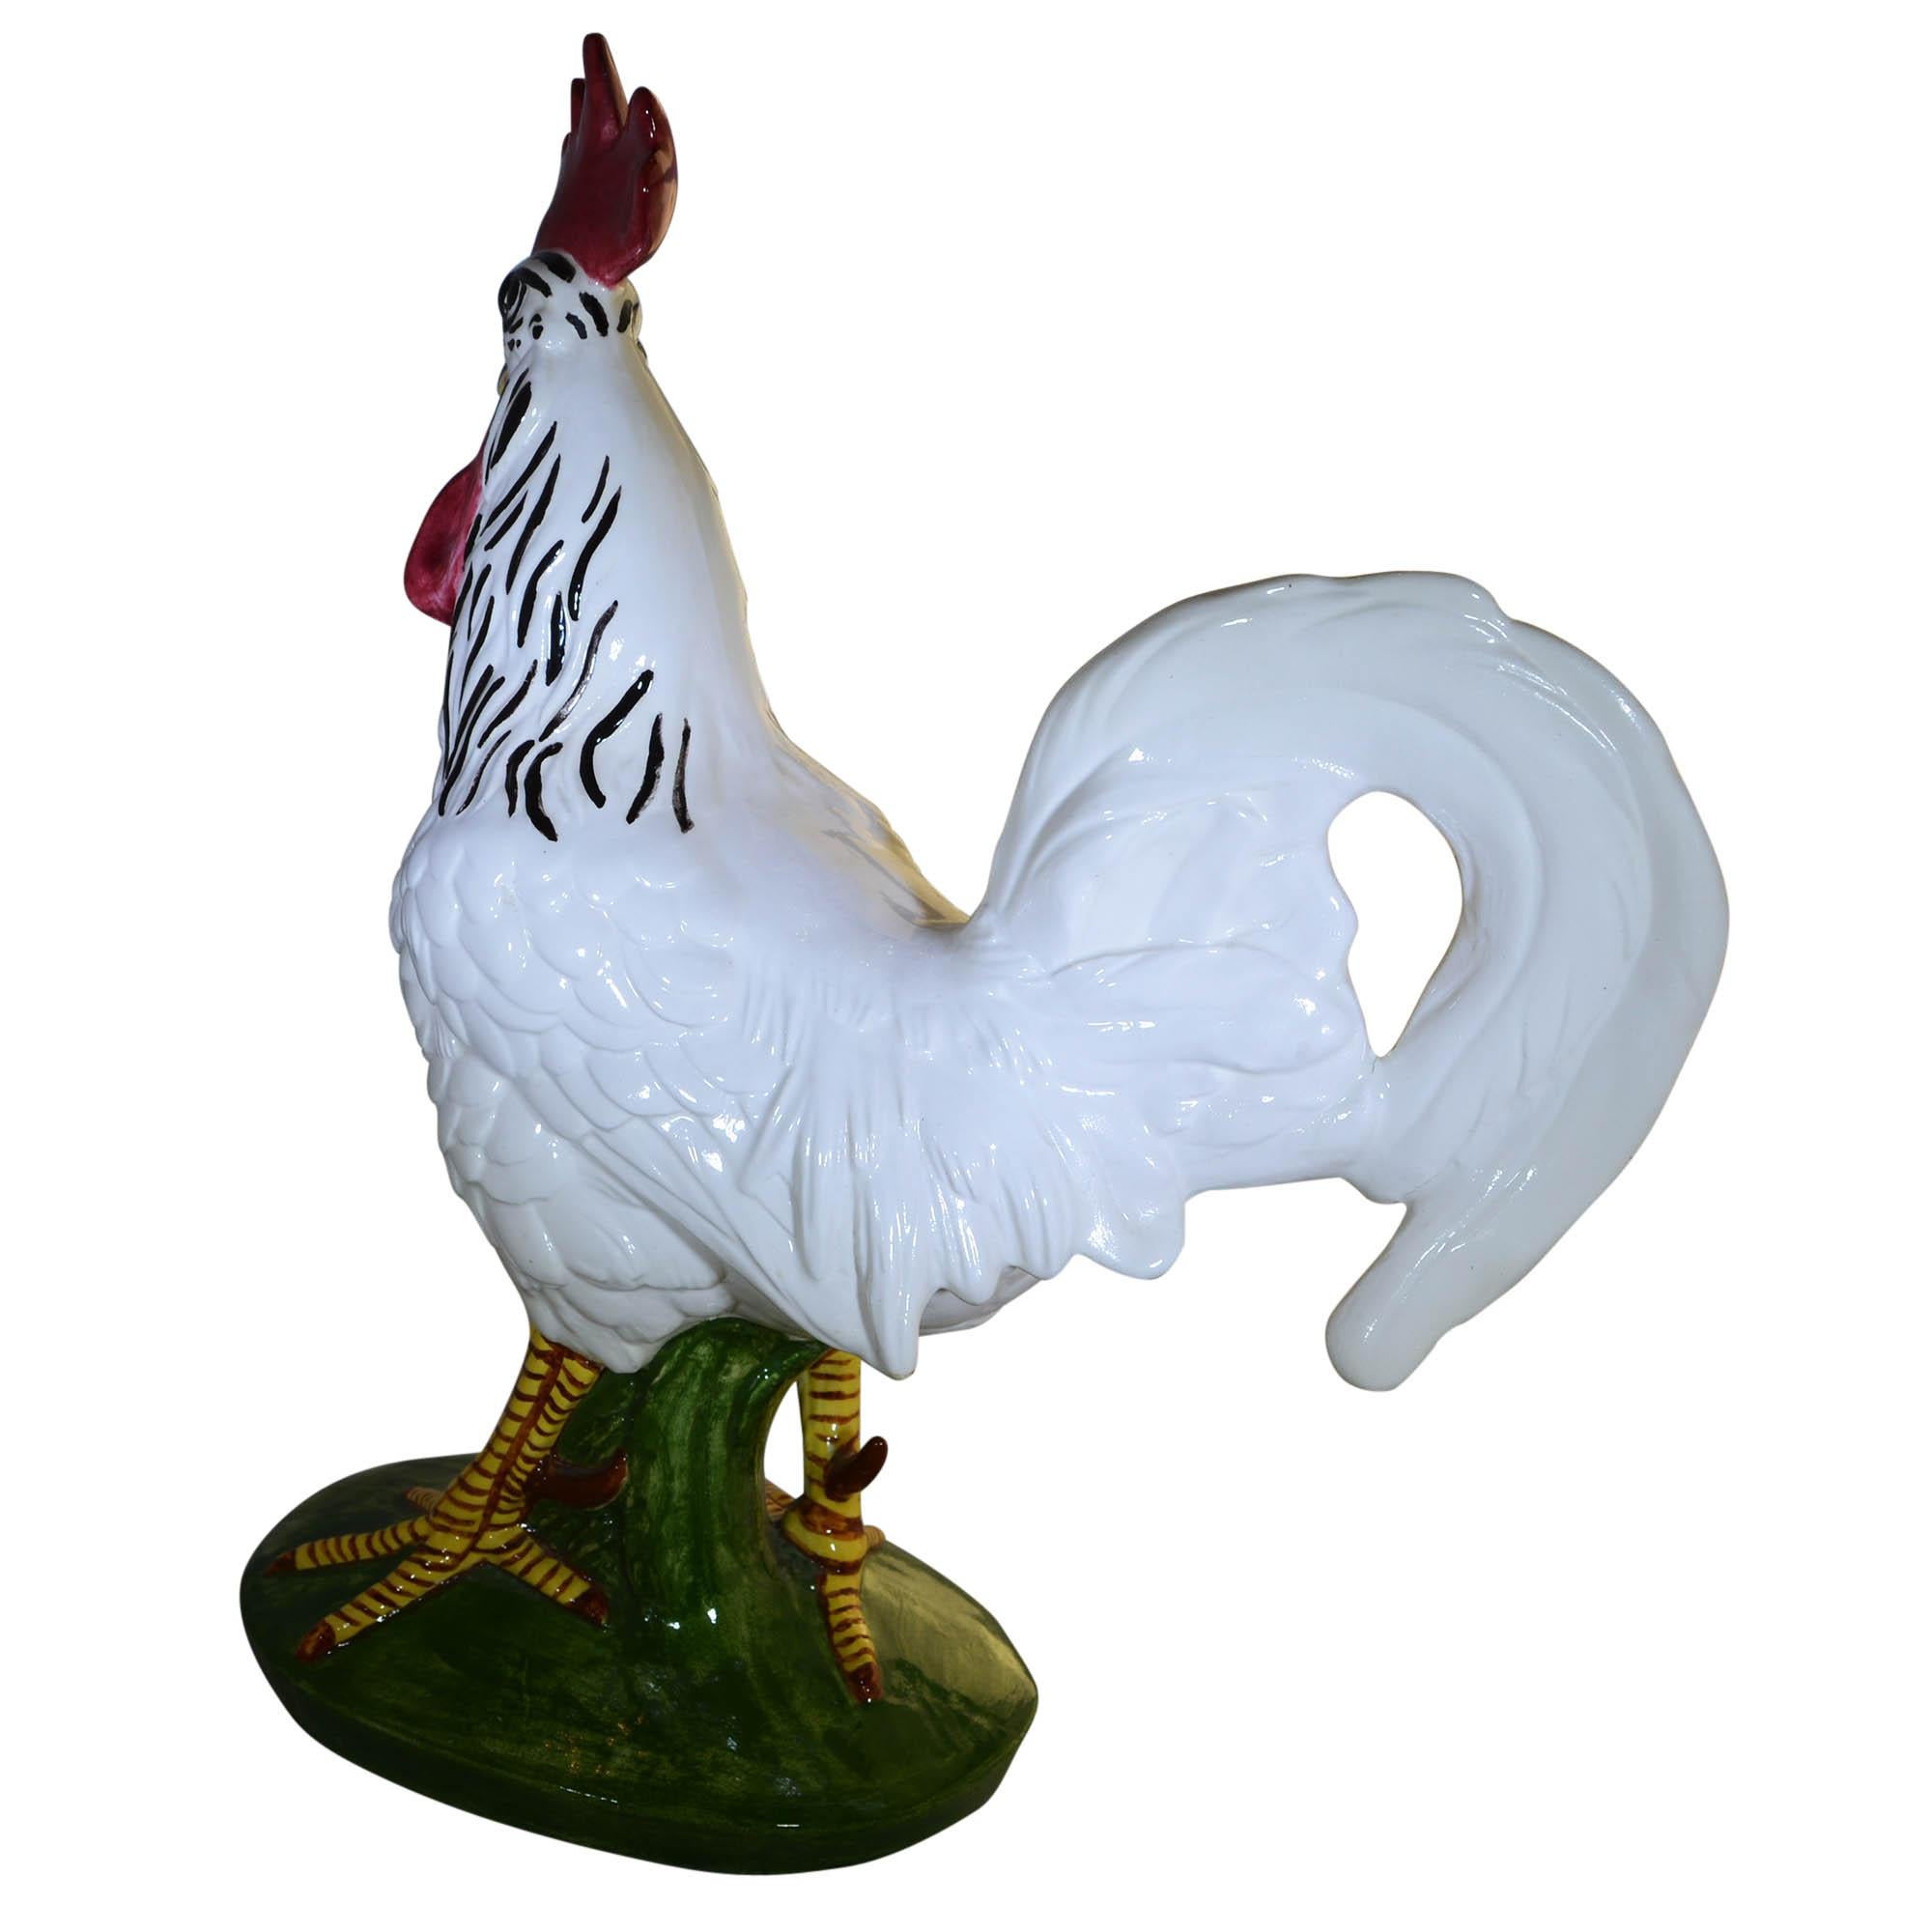 Country Vintage Pennsbury Pottery Rooster Figurine White Green Base